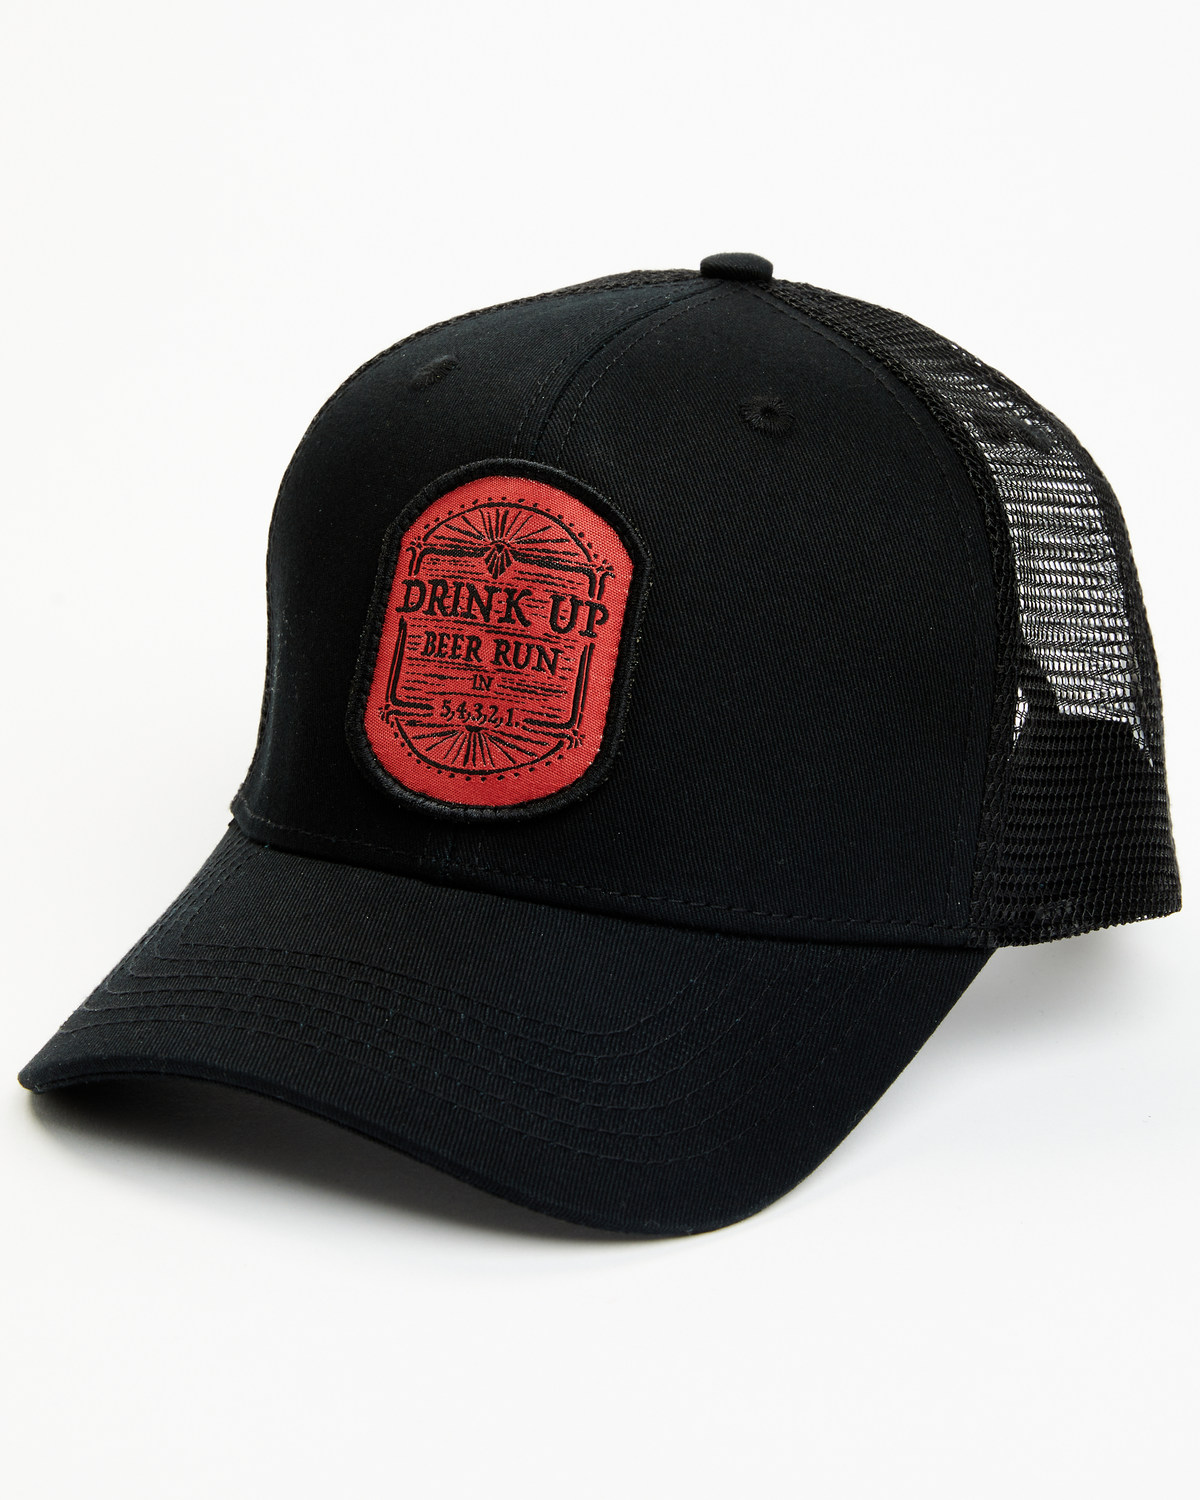 Brothers and Sons Men's Drink Up Beer Run Patch Ball Cap